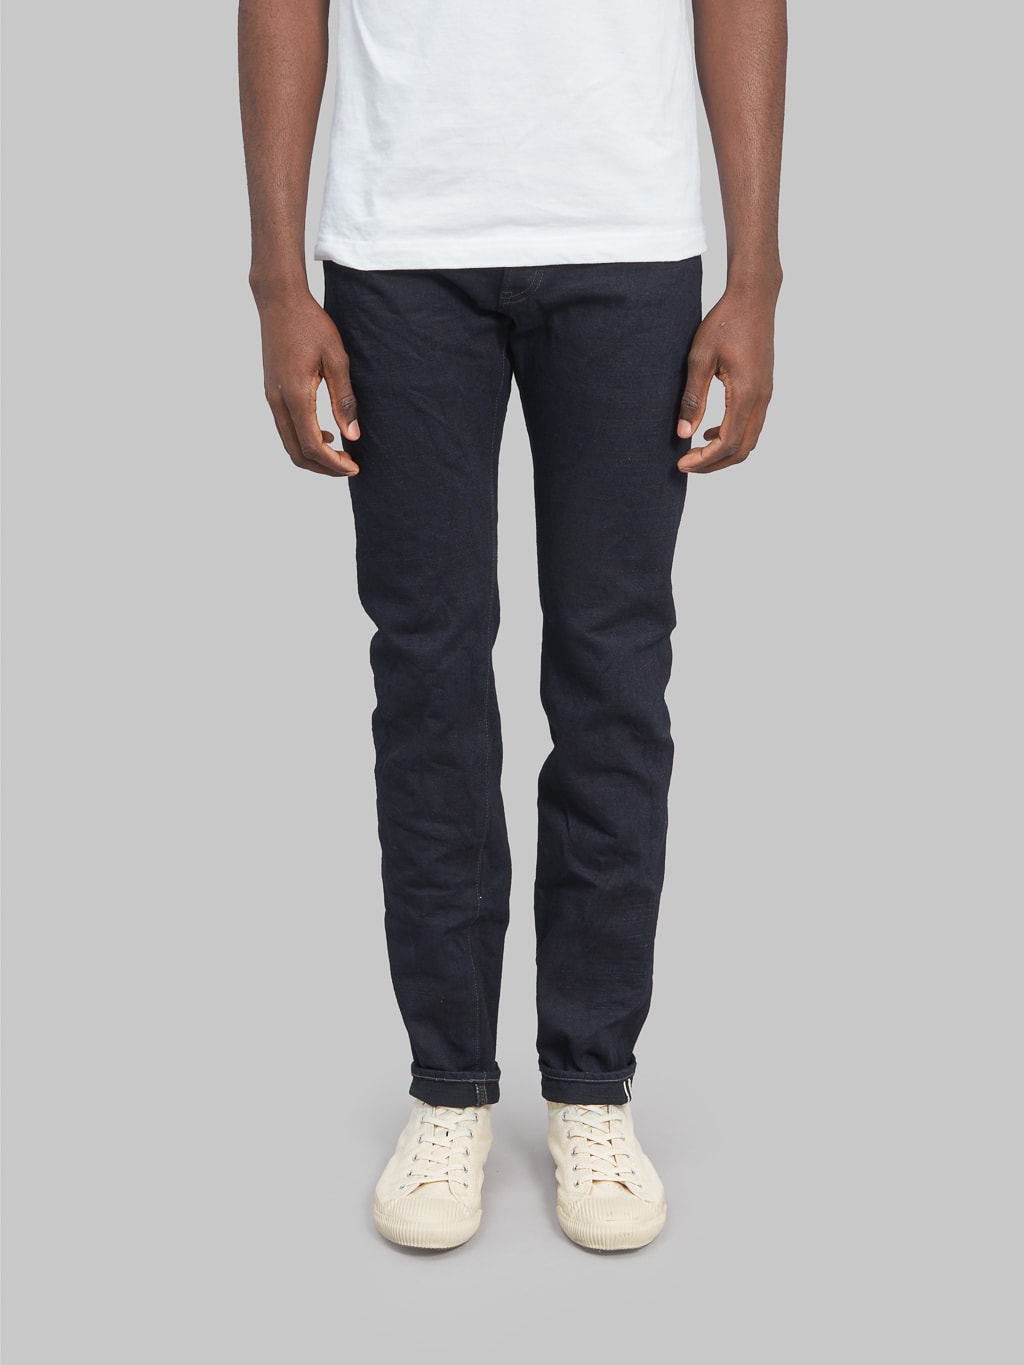 ONI Denim 622 Black Weft 14oz Relaxed Tapered Jeans